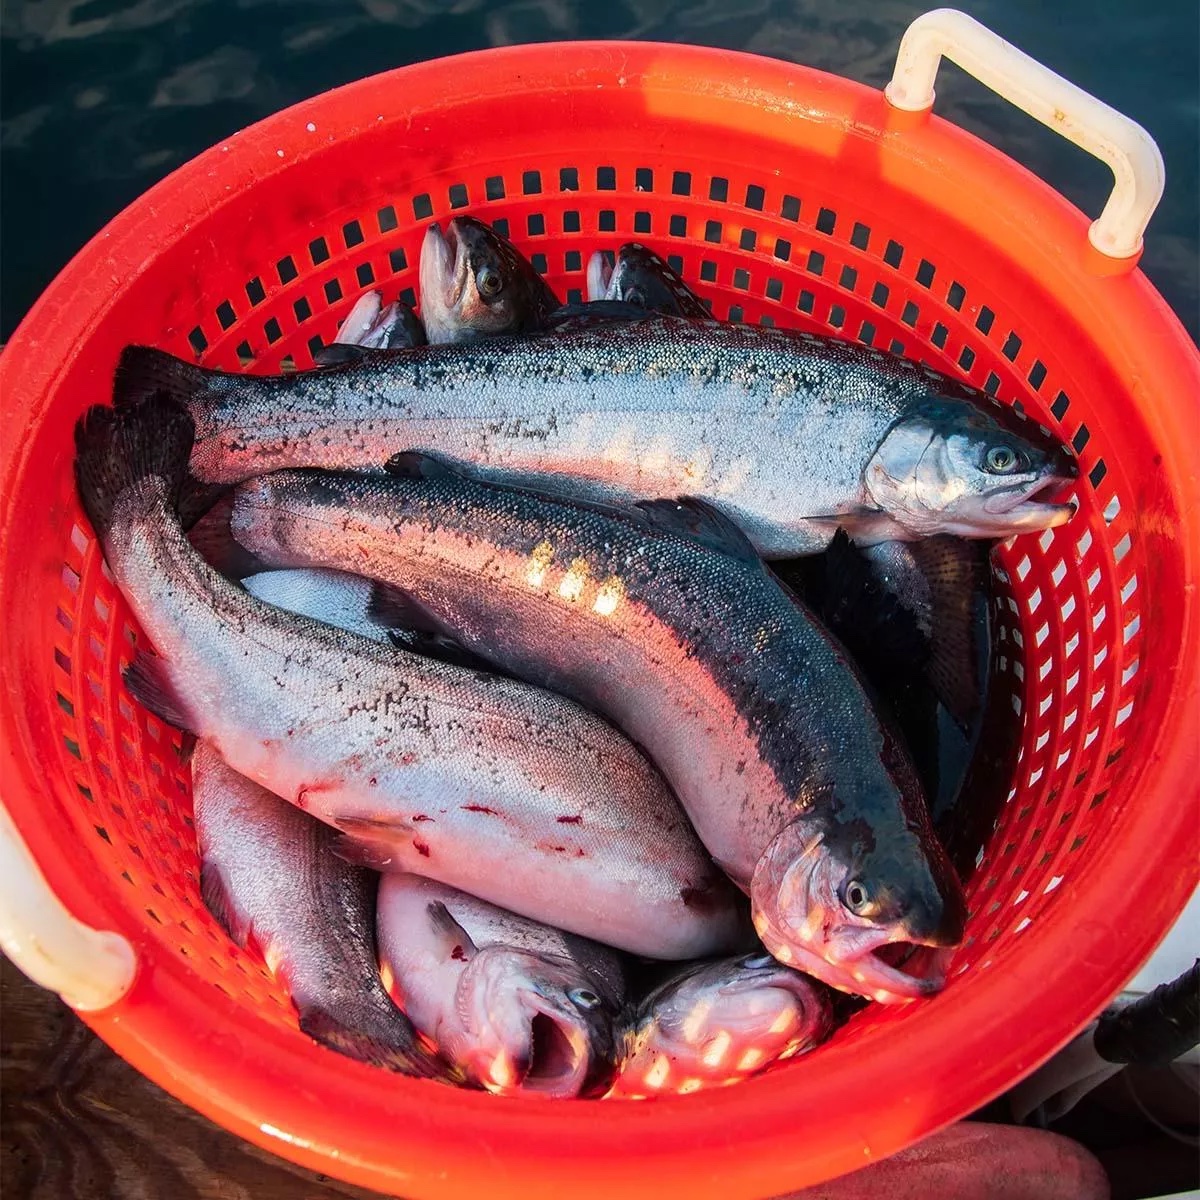 A photo of steelhead trout in an organic plastic bin with holes to let the water out. The trout are recently caught and slick with water.